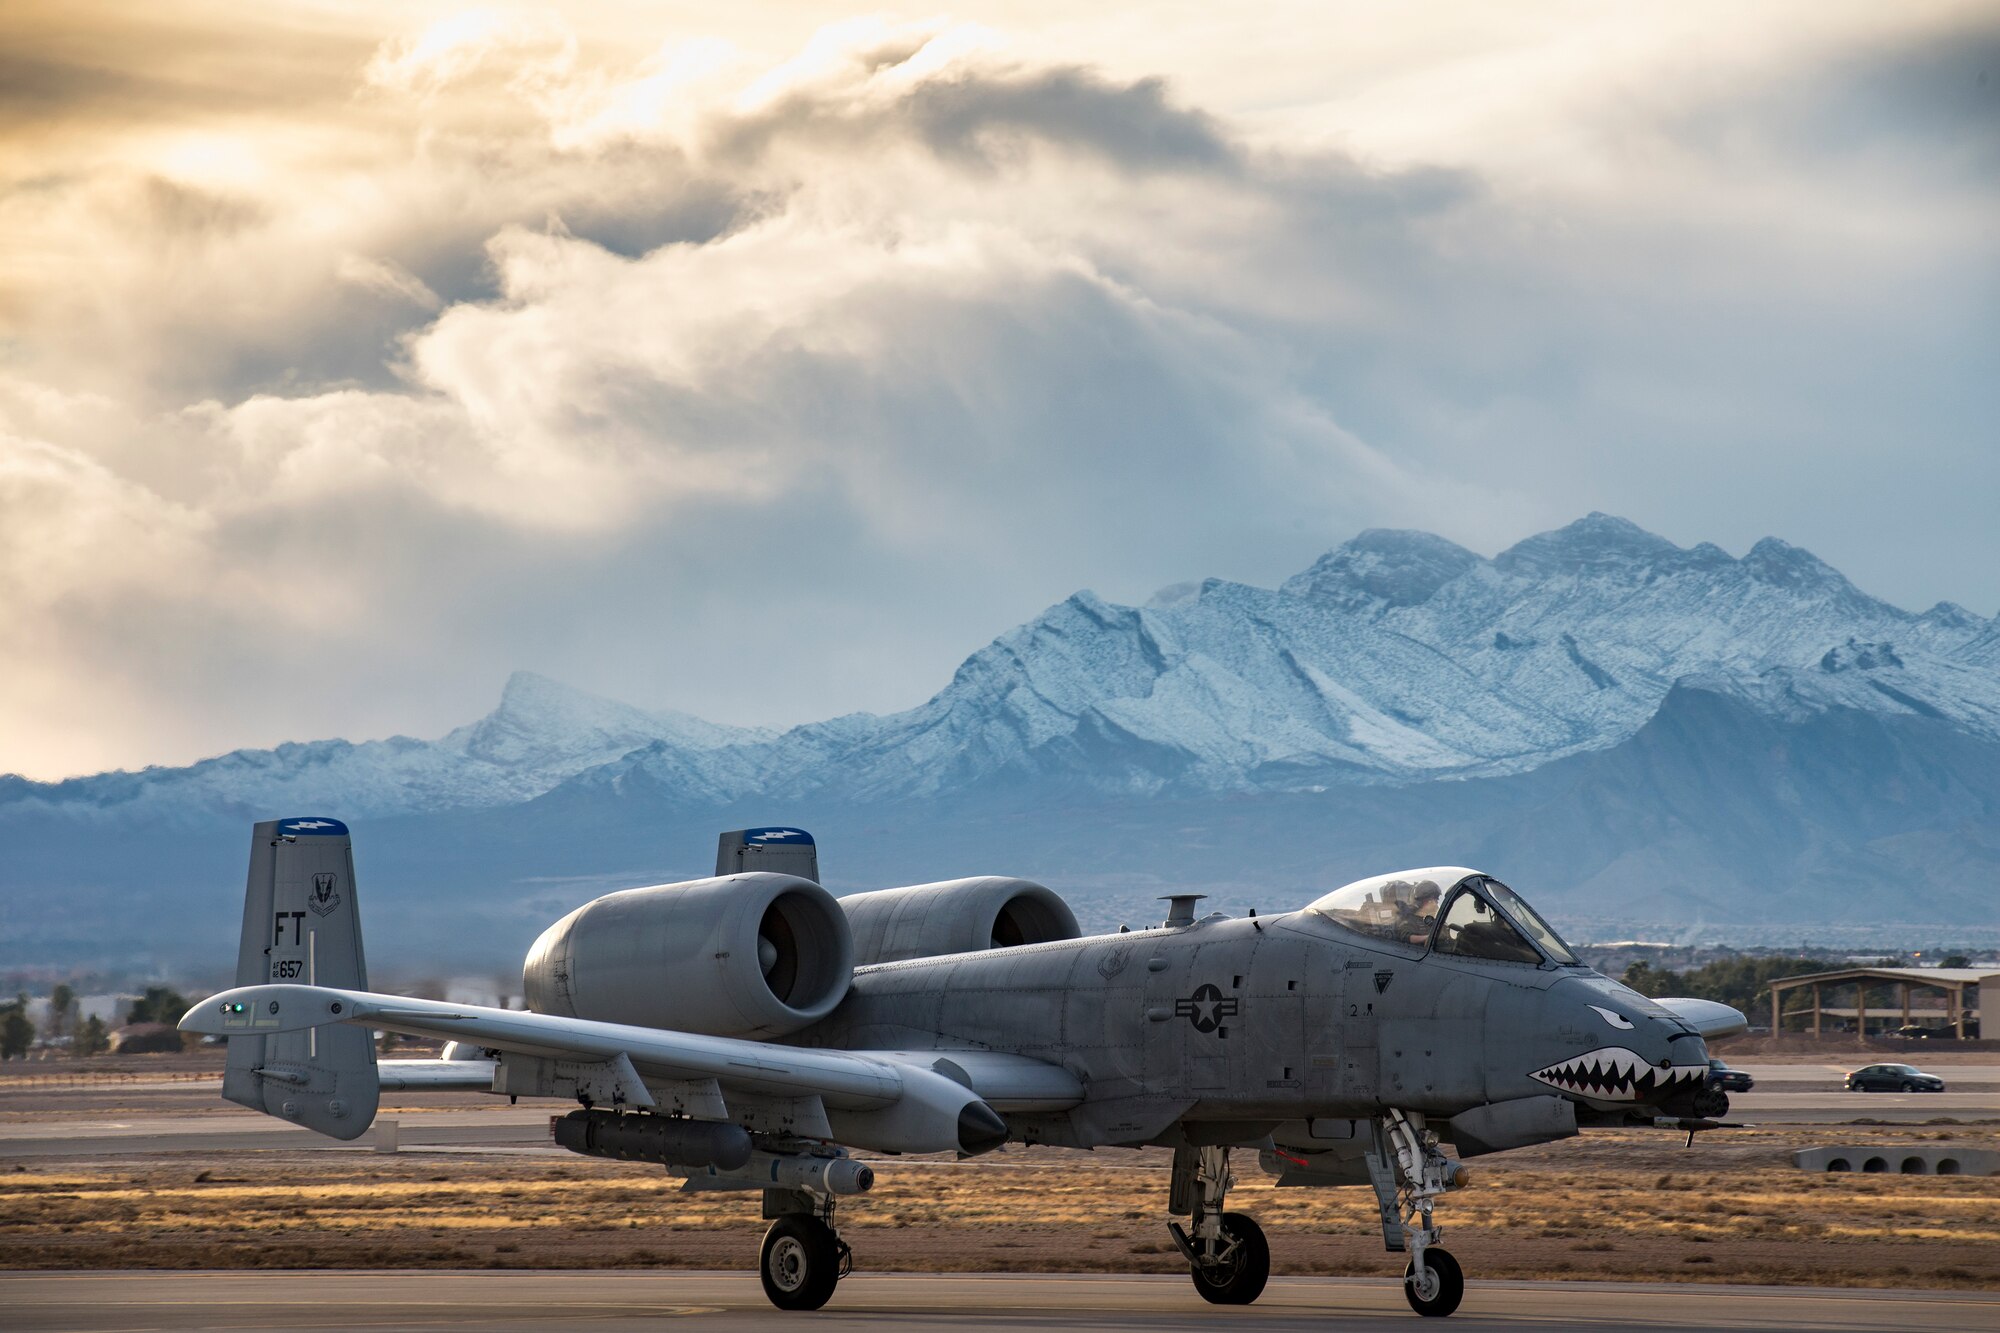 An A-10C Thunderbolt II from the 74th Fighter Squadron taxis down the runway during Green Flag-West 17-03 Jan. 23, 2017, at Nellis Air Force Base, Nev. (Photo by SSgt Ryan Callaghan)